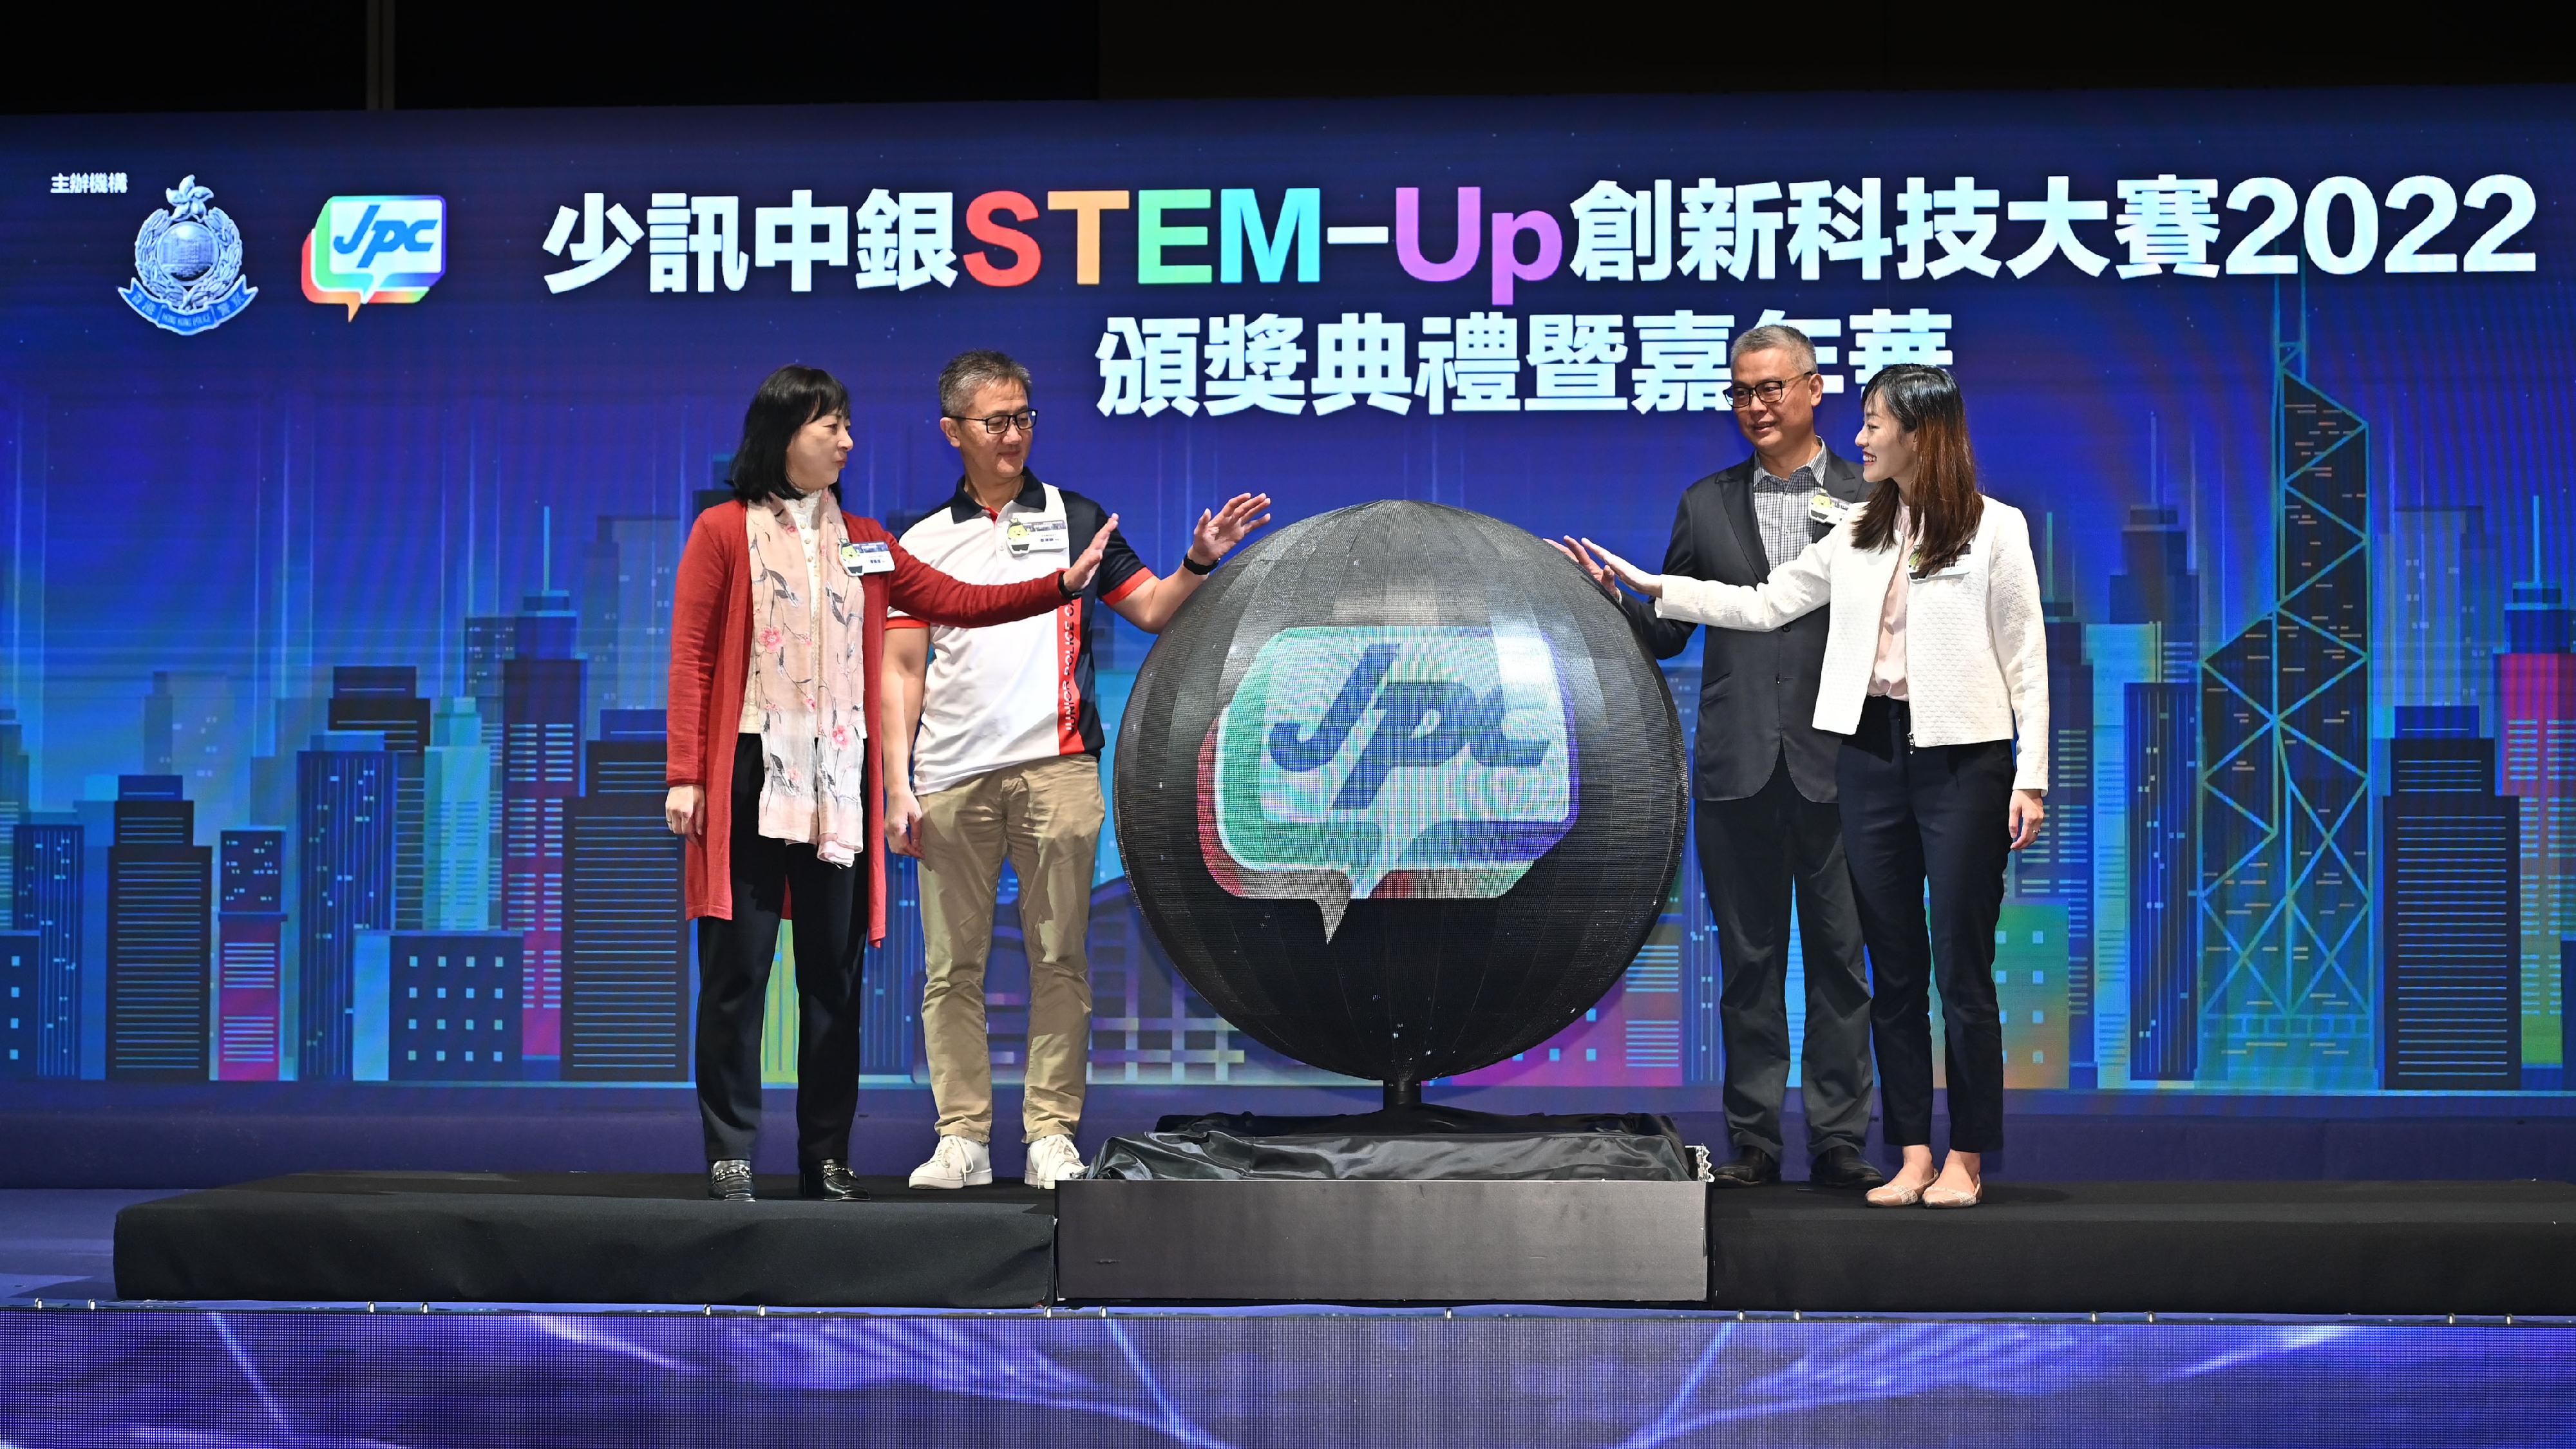 The JPC x BOC STEM-Up Innovation and Technology Competition 2022, organised by the Junior Police Call, held its award presentation ceremony at the Hong Kong Convention and Exhibition Centre today (April 1). The Commissioner of Police, Mr Siu Chak-yee (second left); the Chief Information Officer of Bank of China (Hong Kong) Limited, Dr Rocky Cheng (second right); the Permanent Secretary for Education, Ms Michelle Li (first left); and the Under Secretary for Innovation, Technology and Industry, Ms Lillian Cheong (first right), officiated at the ceremony.